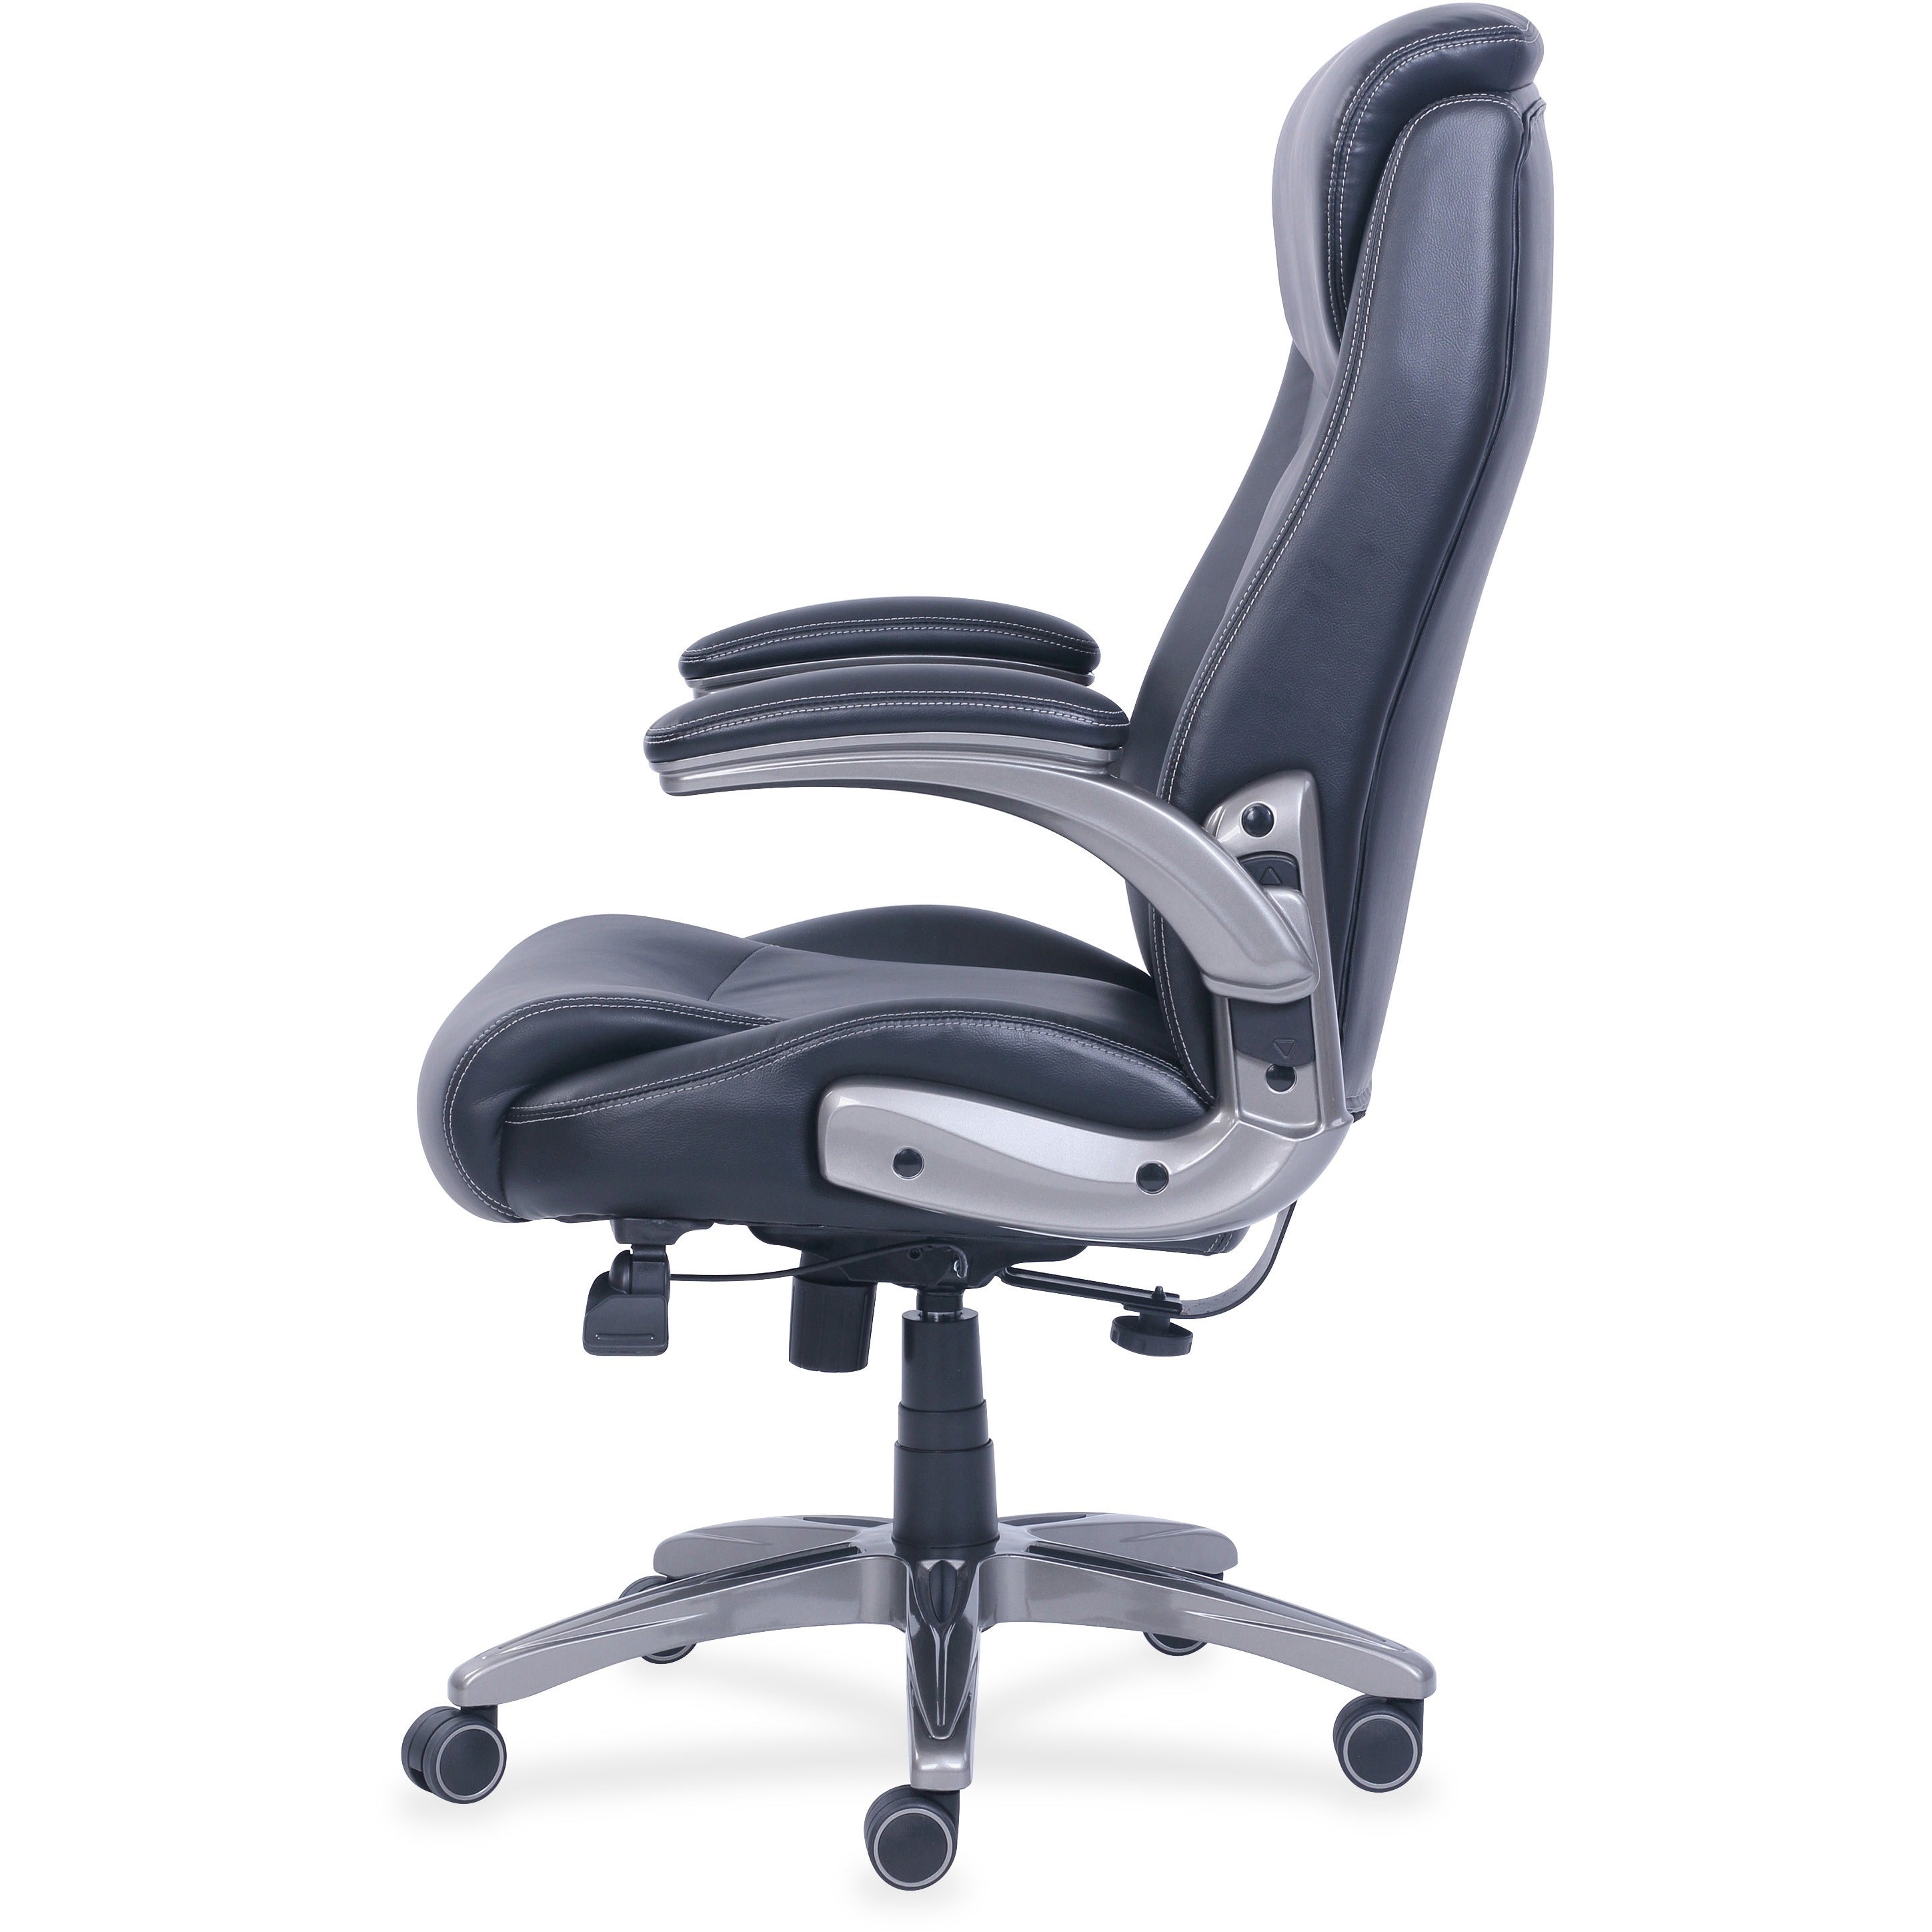 lorell-wellness-by-design-revive-executive-office-chair-black-bonded-leather-seat-black-bonded-leather-back-5-star-base-1-each_llr48730 - 3